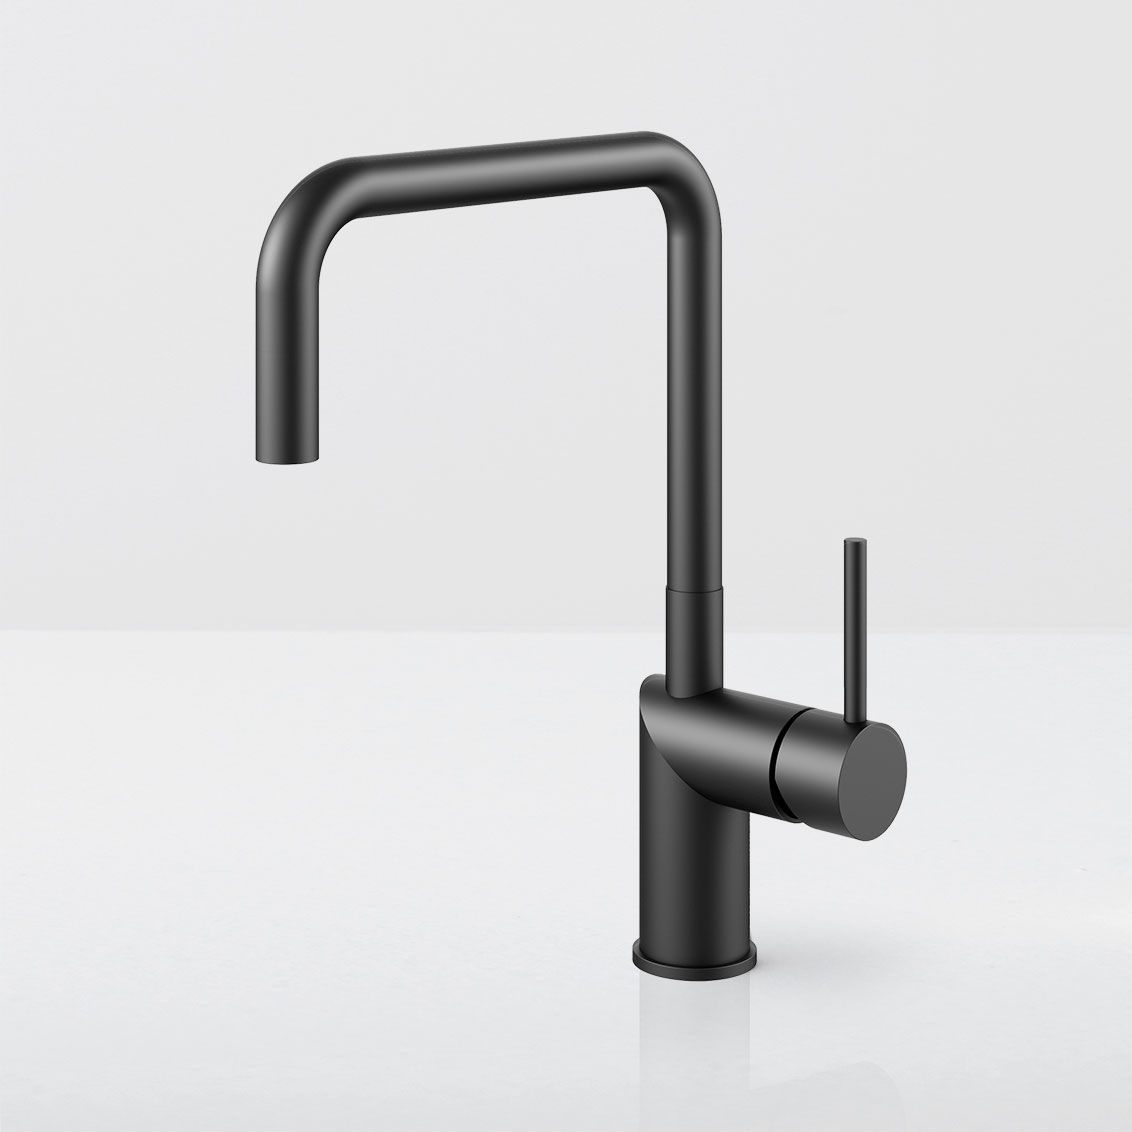 Mixer Tap Designs: Elevating Your Kitchen Aesthetic with Style and Function